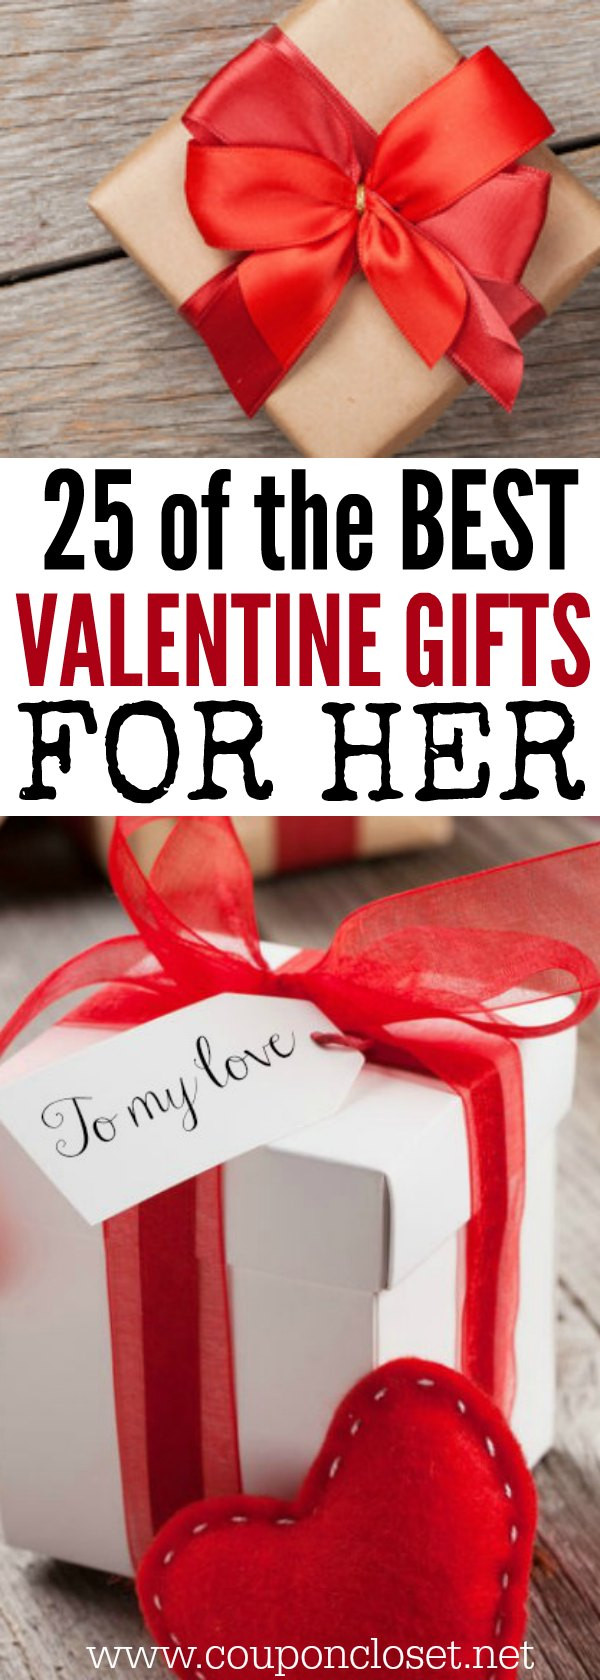 Awesome Valentines Day Ideas For Her
 25 Valentine s Day ts for Her on a bud  Coupon Closet